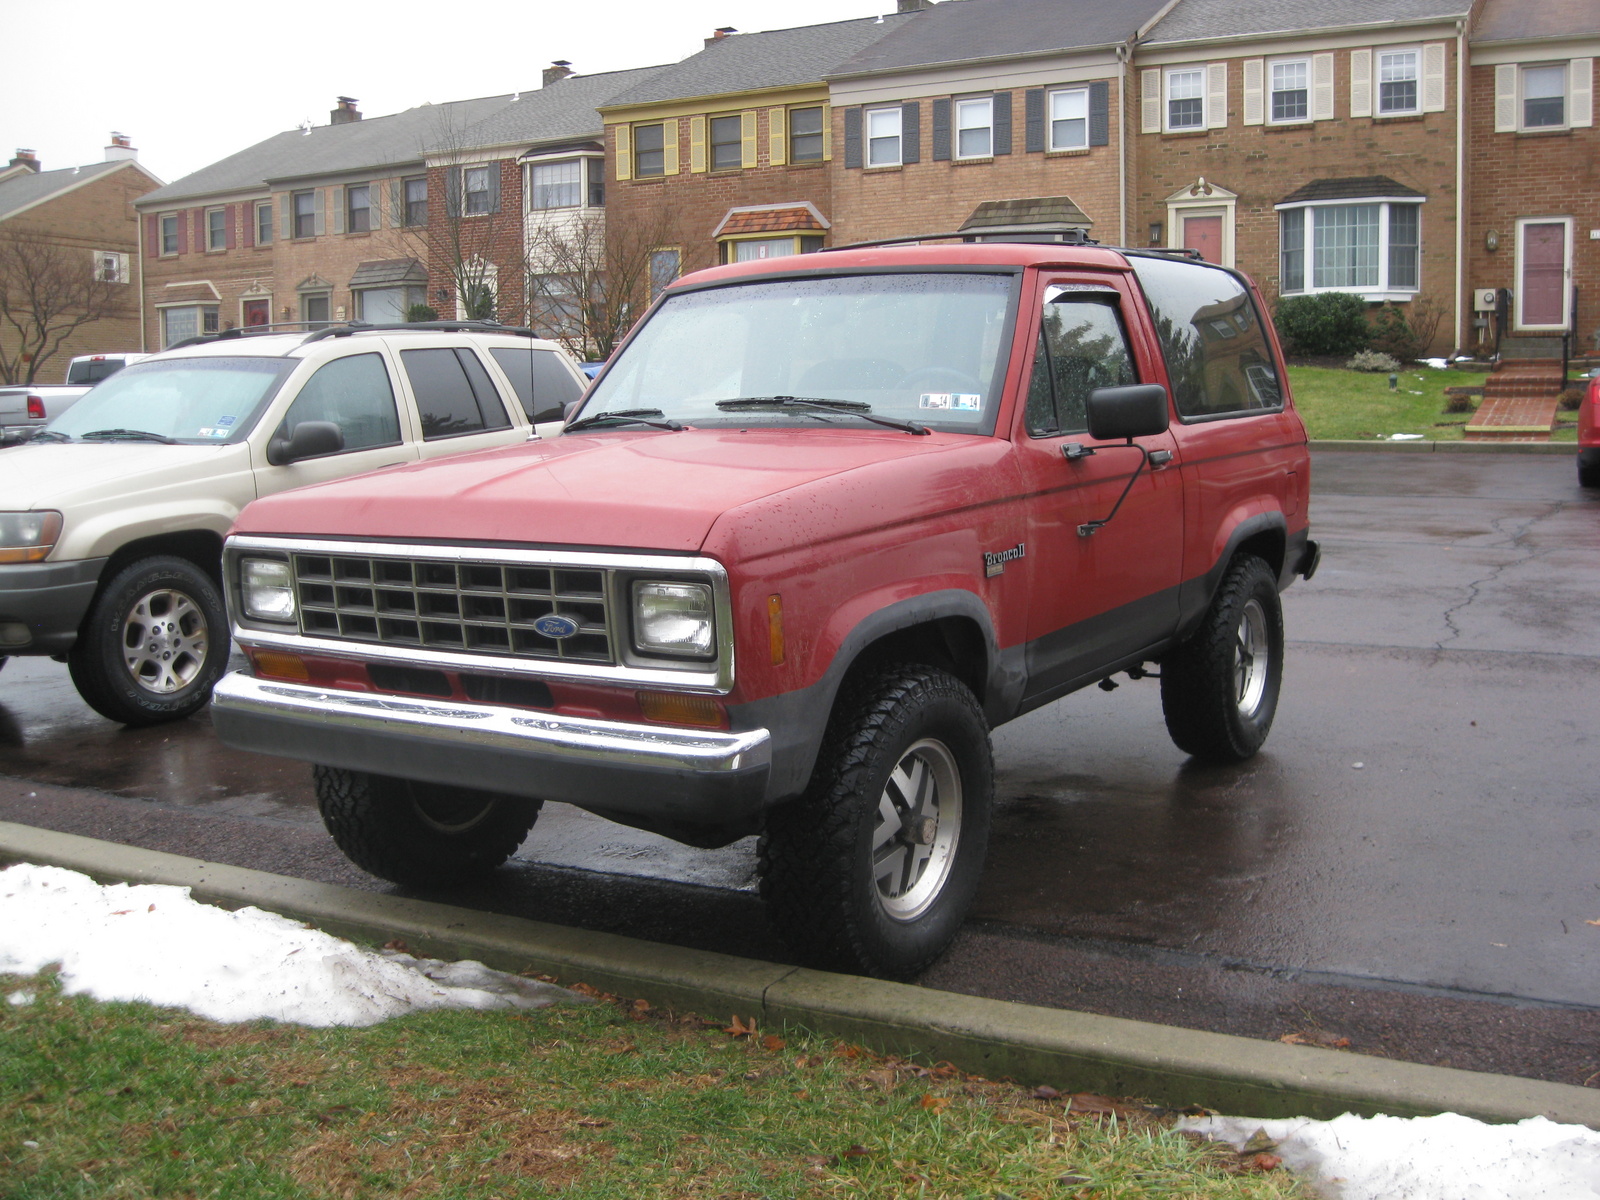 1988 Ford bronco eddie bauer review #8